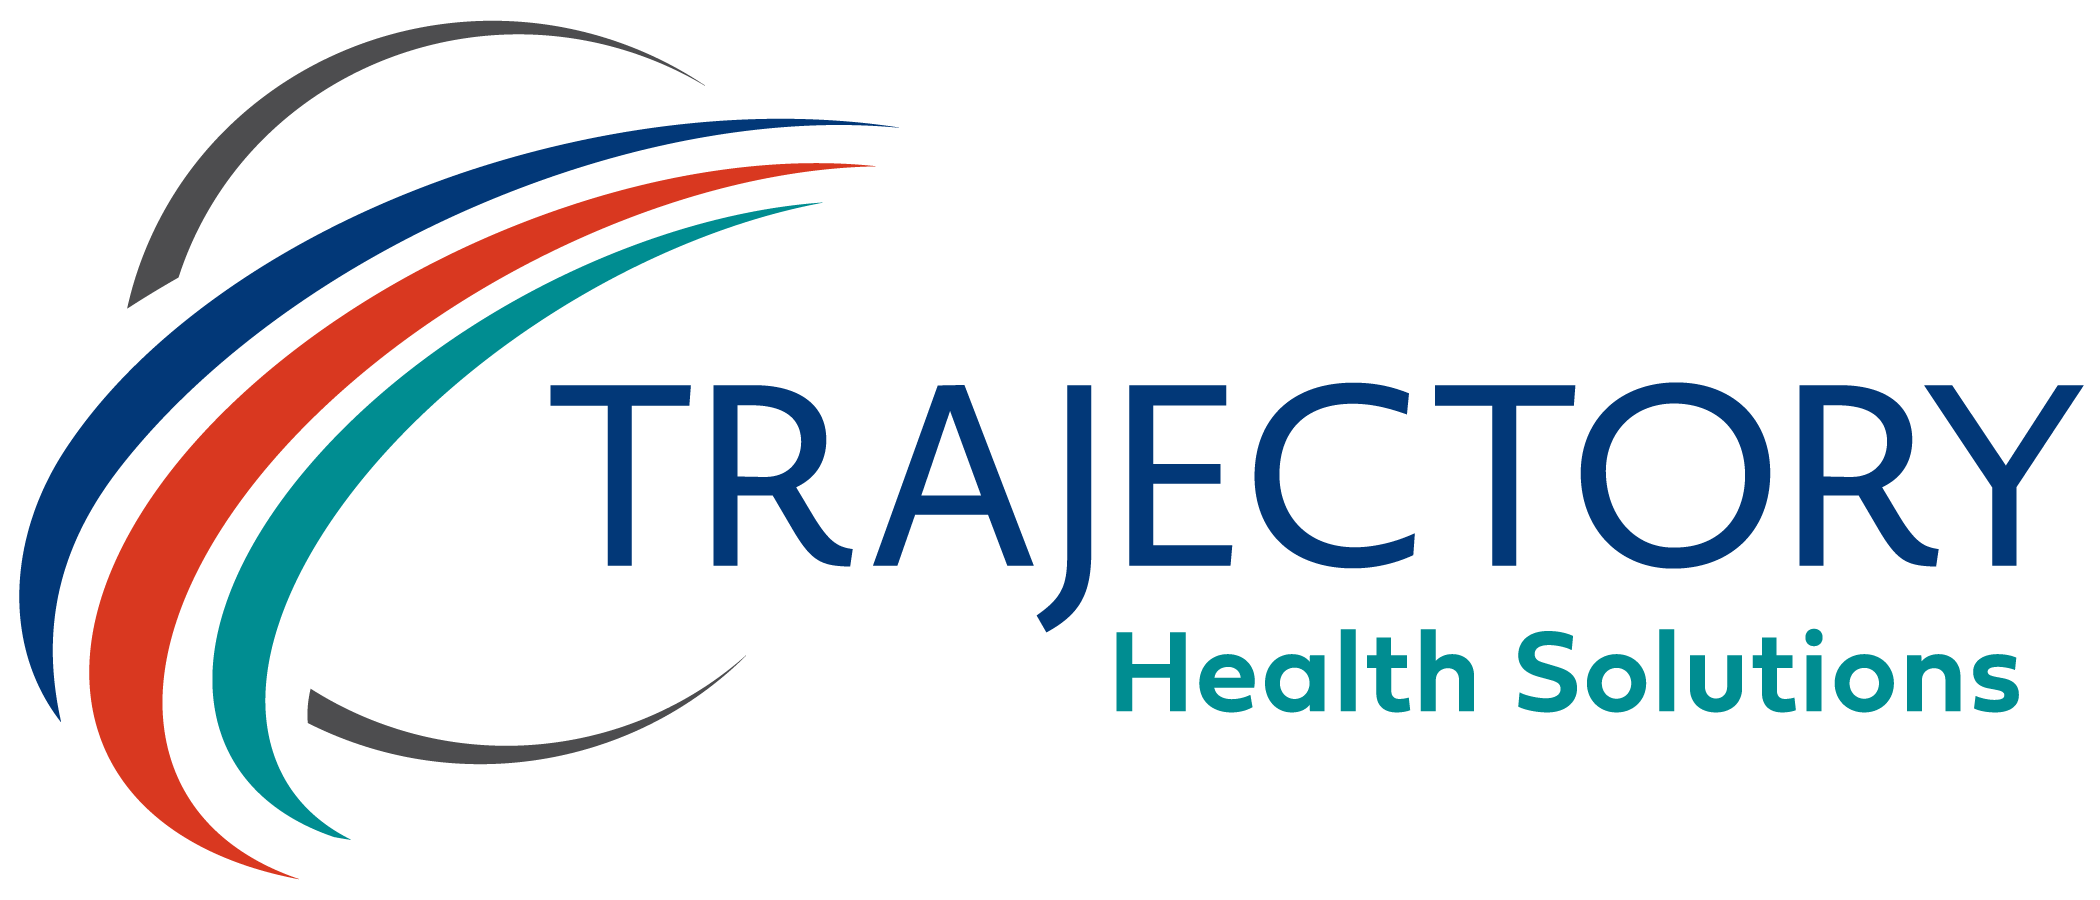 Trajectory Health Solutions